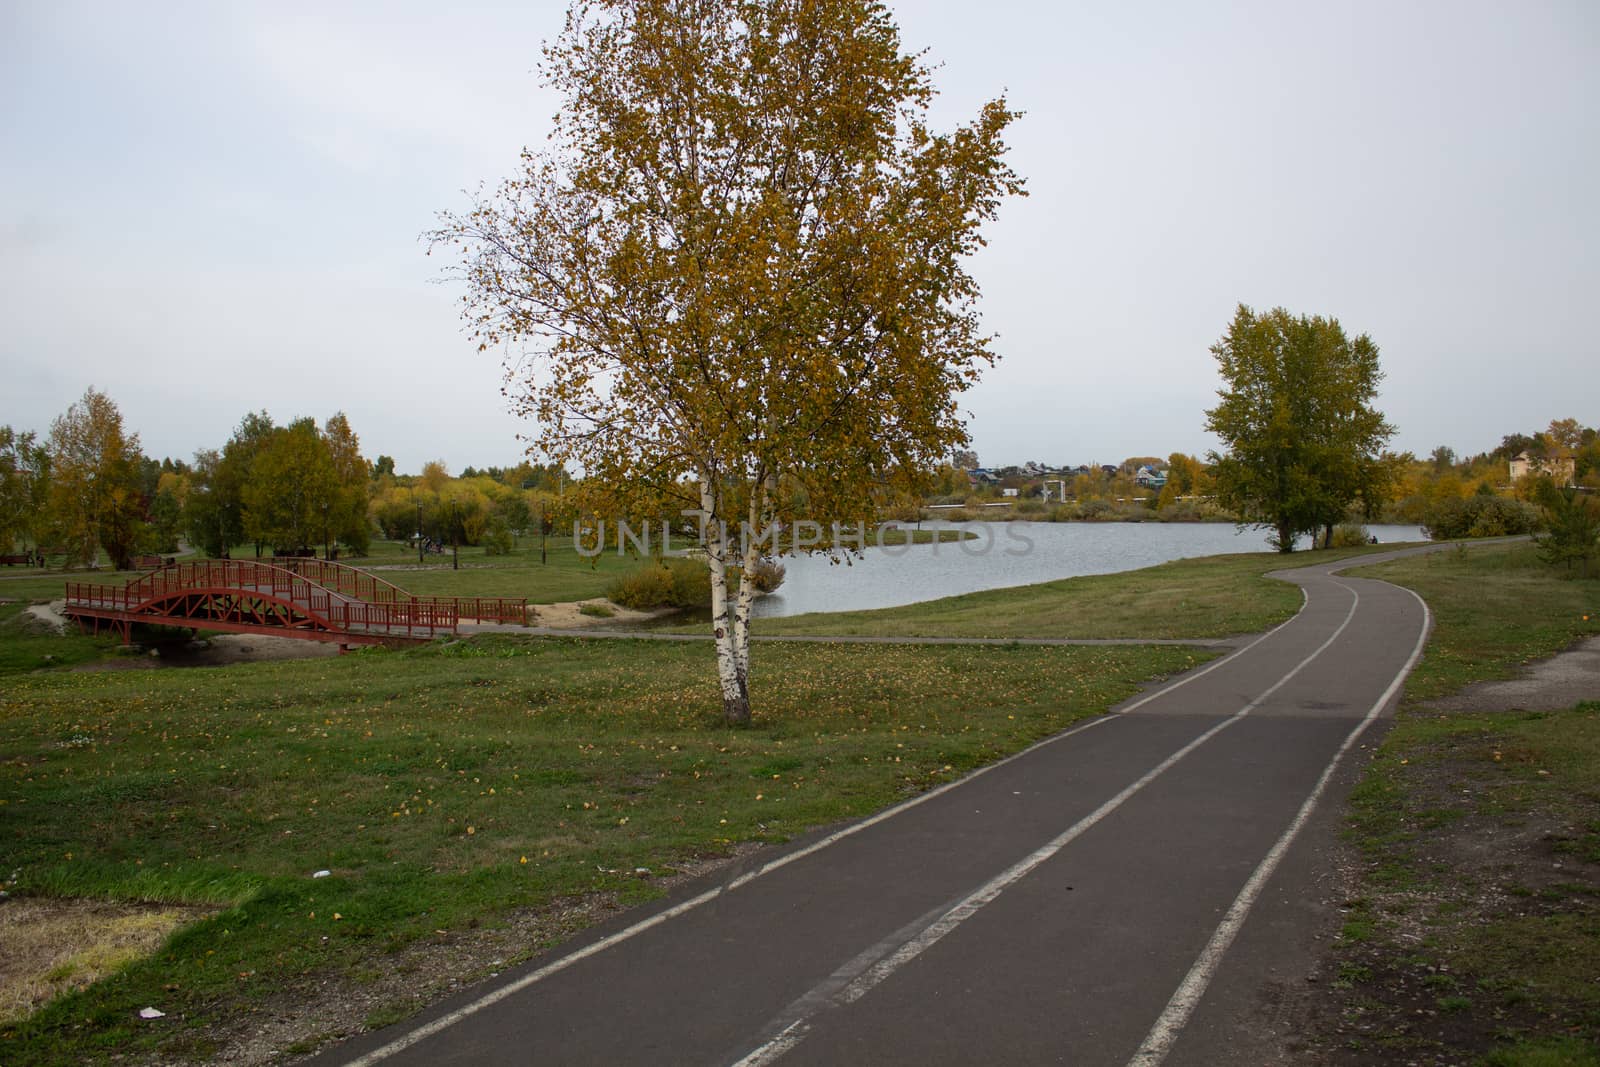 The road to the beautiful backdrop of the Park near the lake.